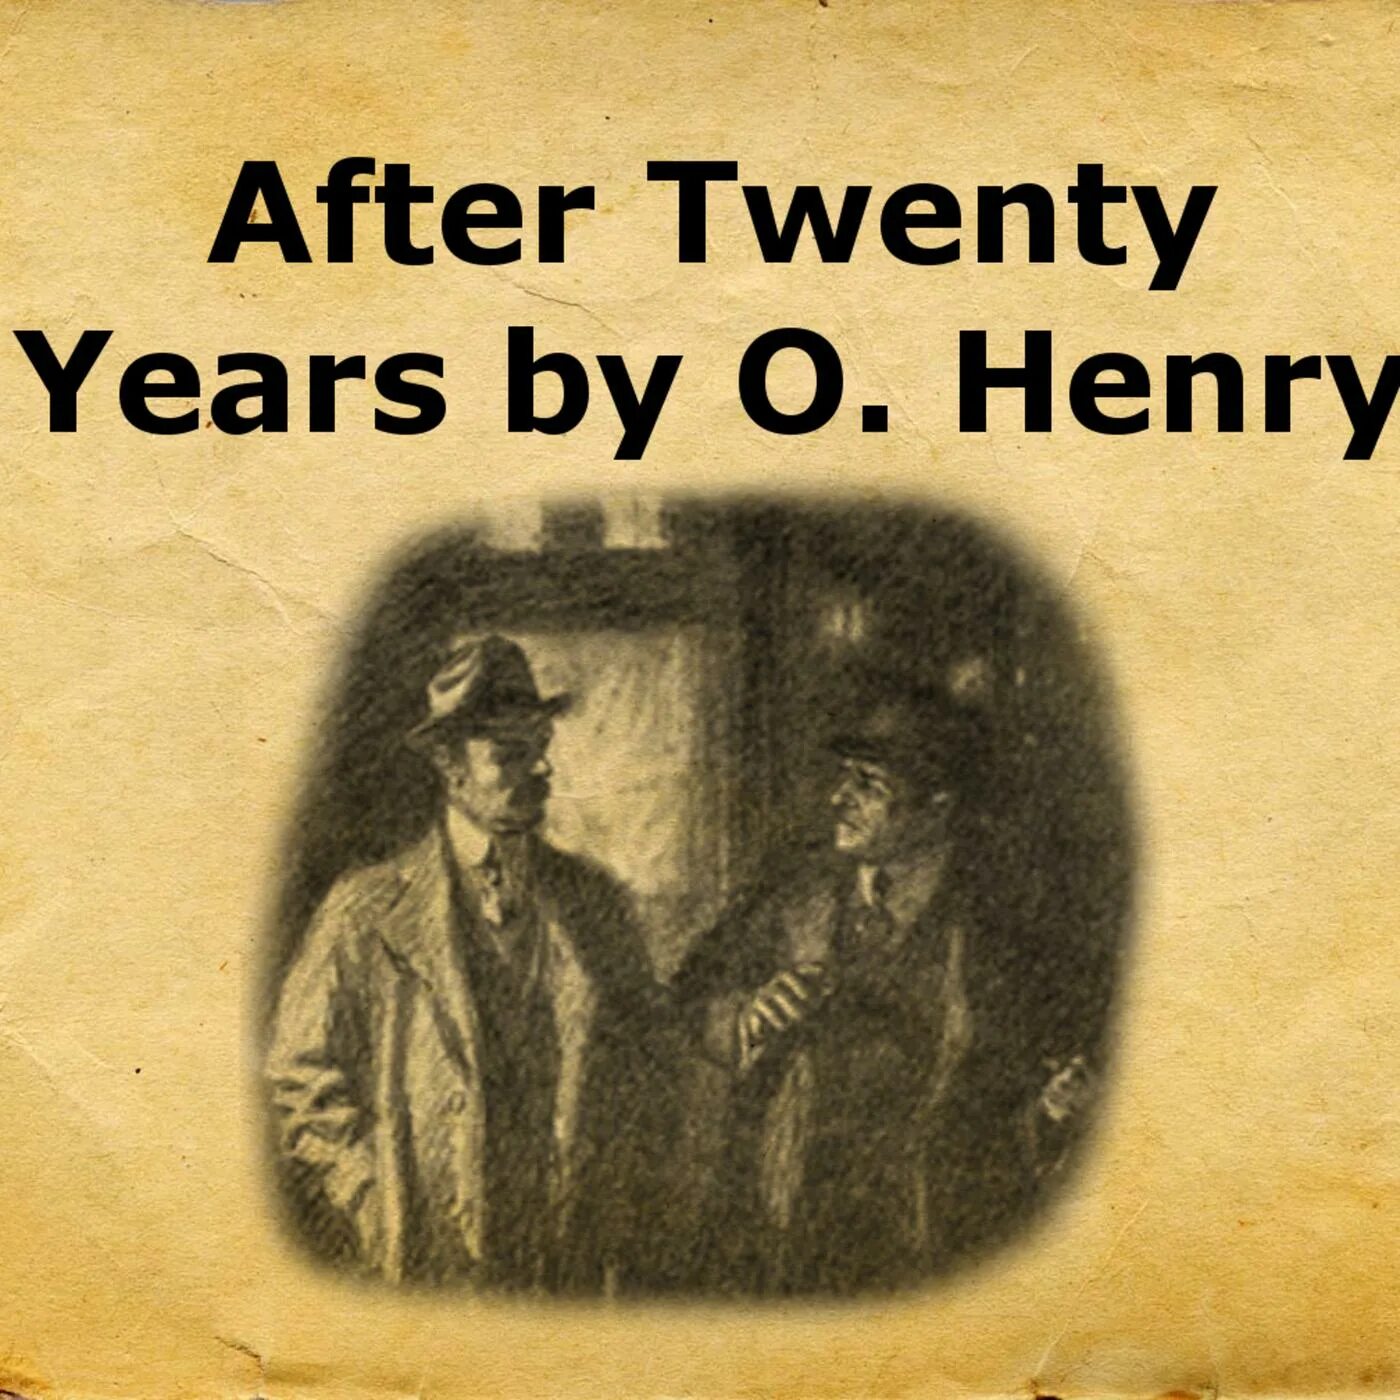 It was twenty years. After twenty years o Henry. O. Henry "collected Tales vi". Cactus o Henry.